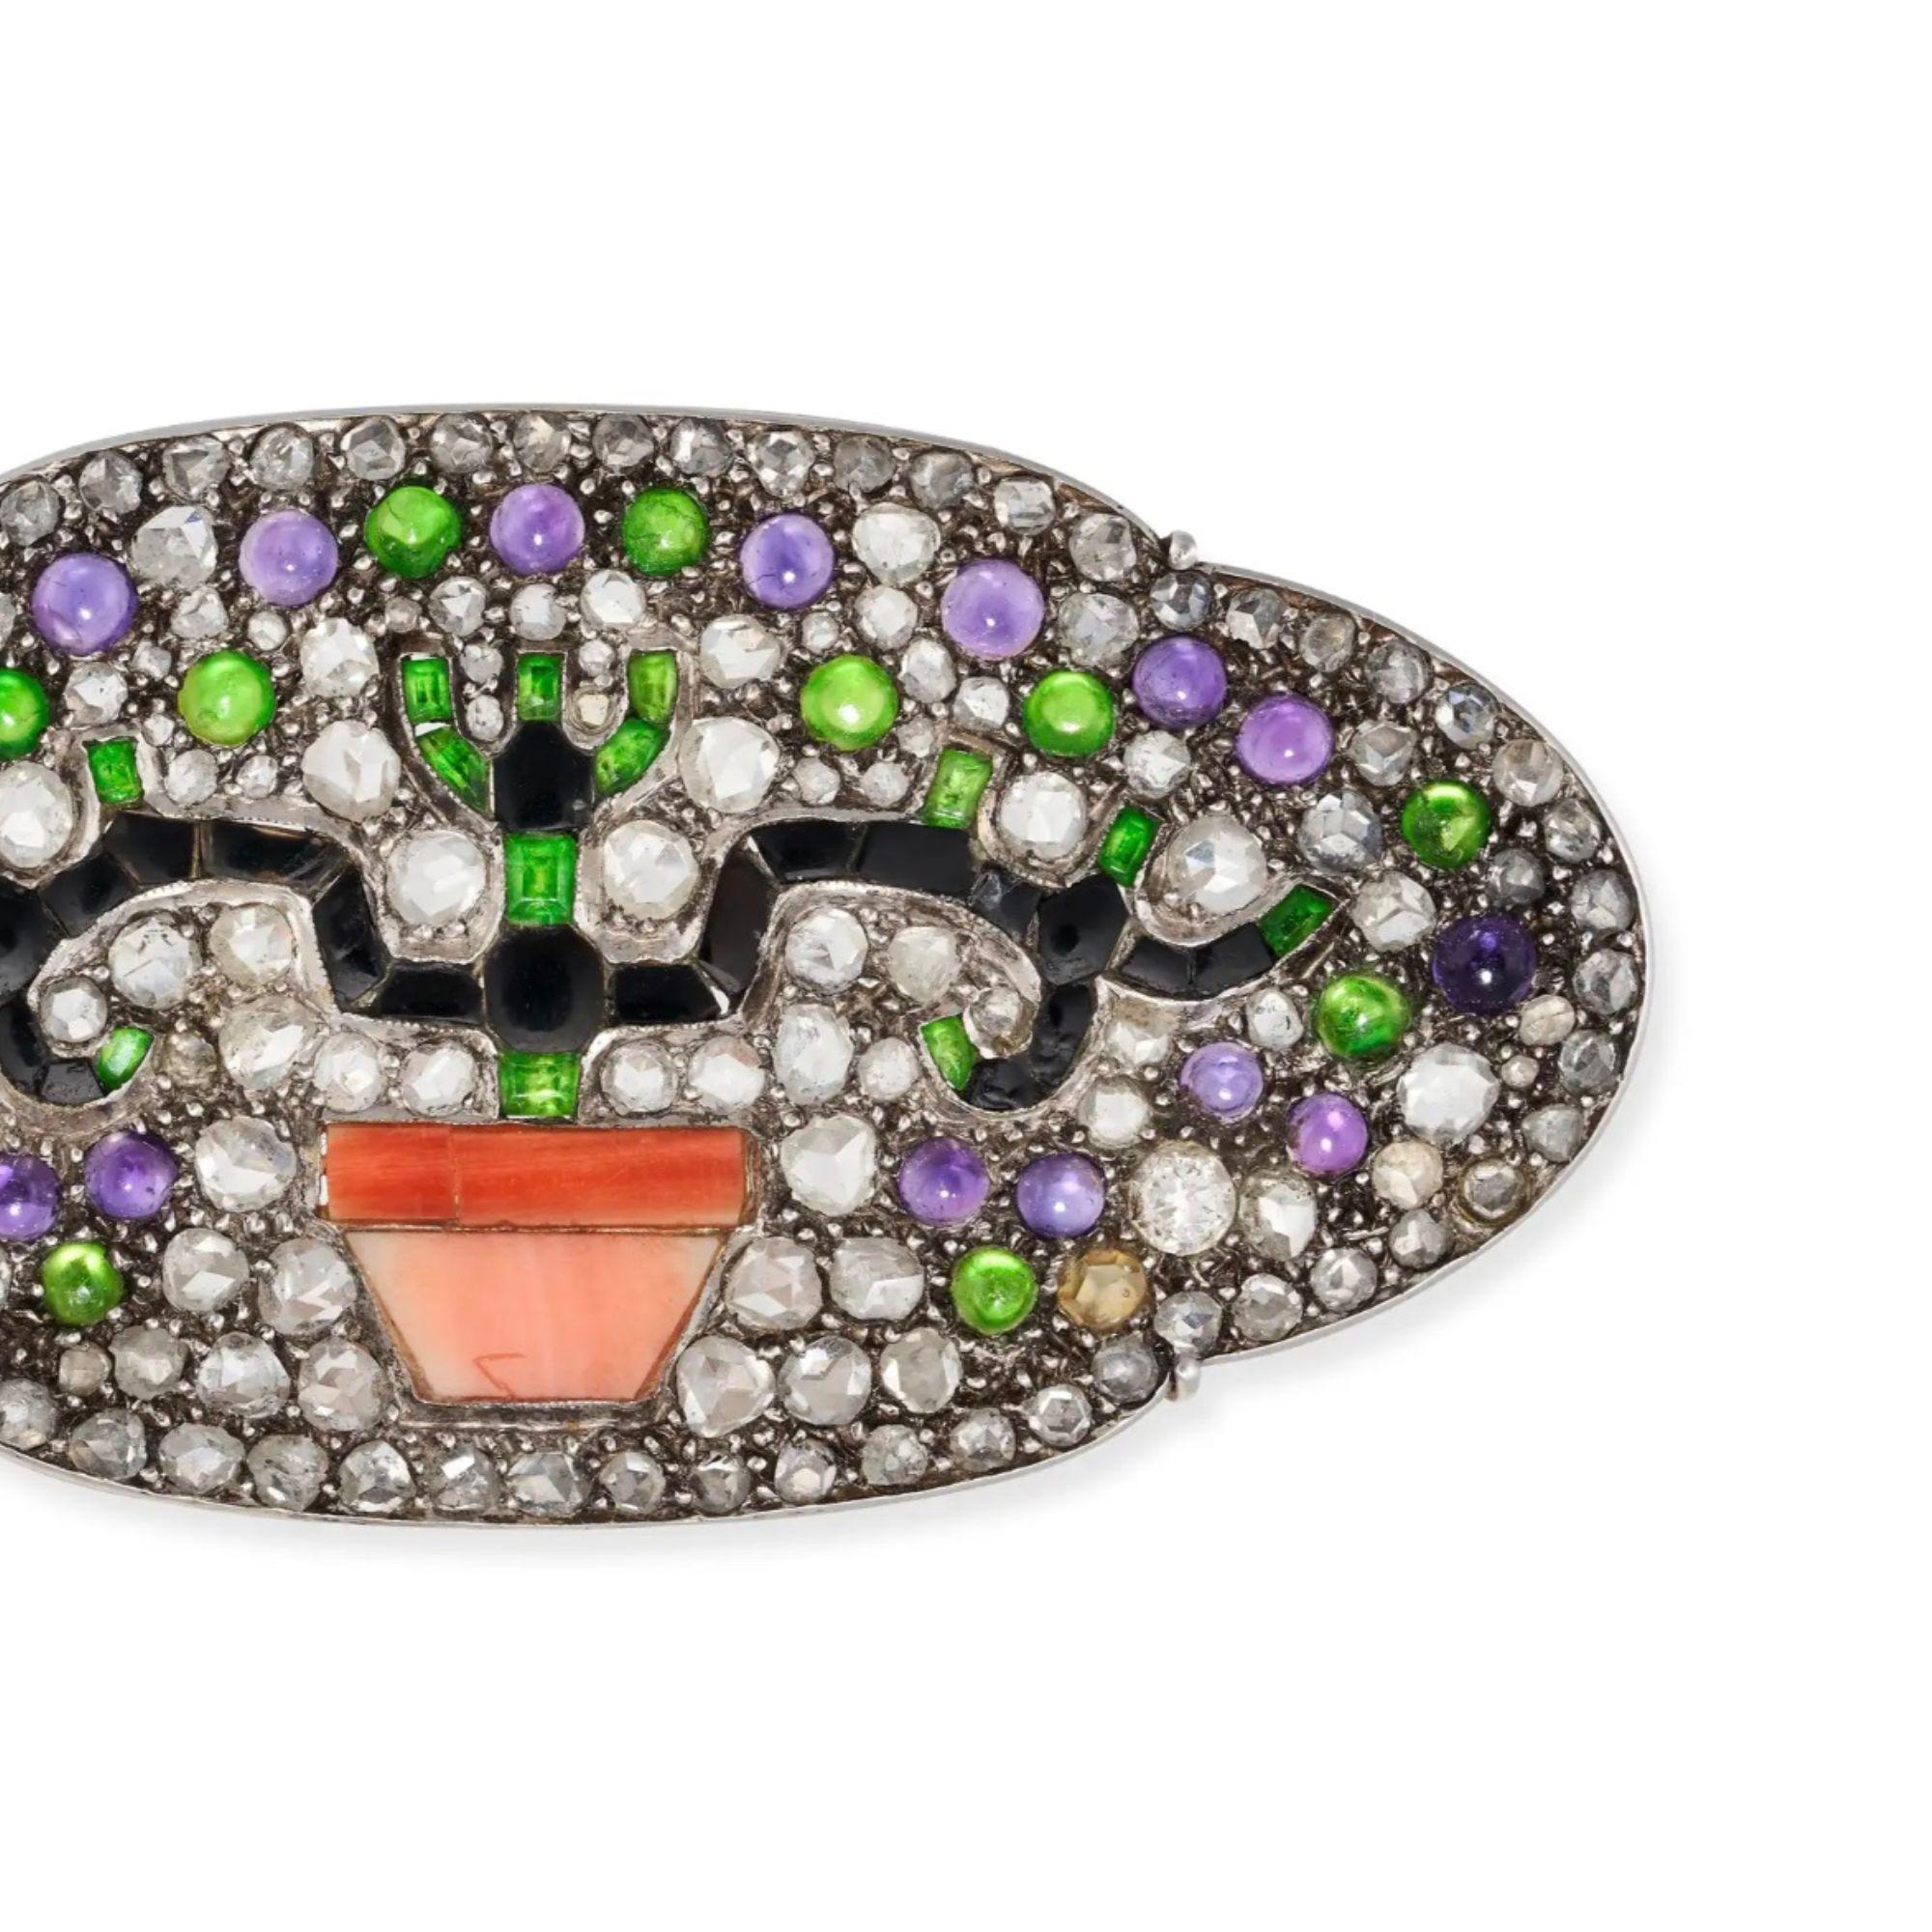 An Exquisite Antique Art Deco French Multigem Japoisme Brooch In Good Condition For Sale In Weston, MA